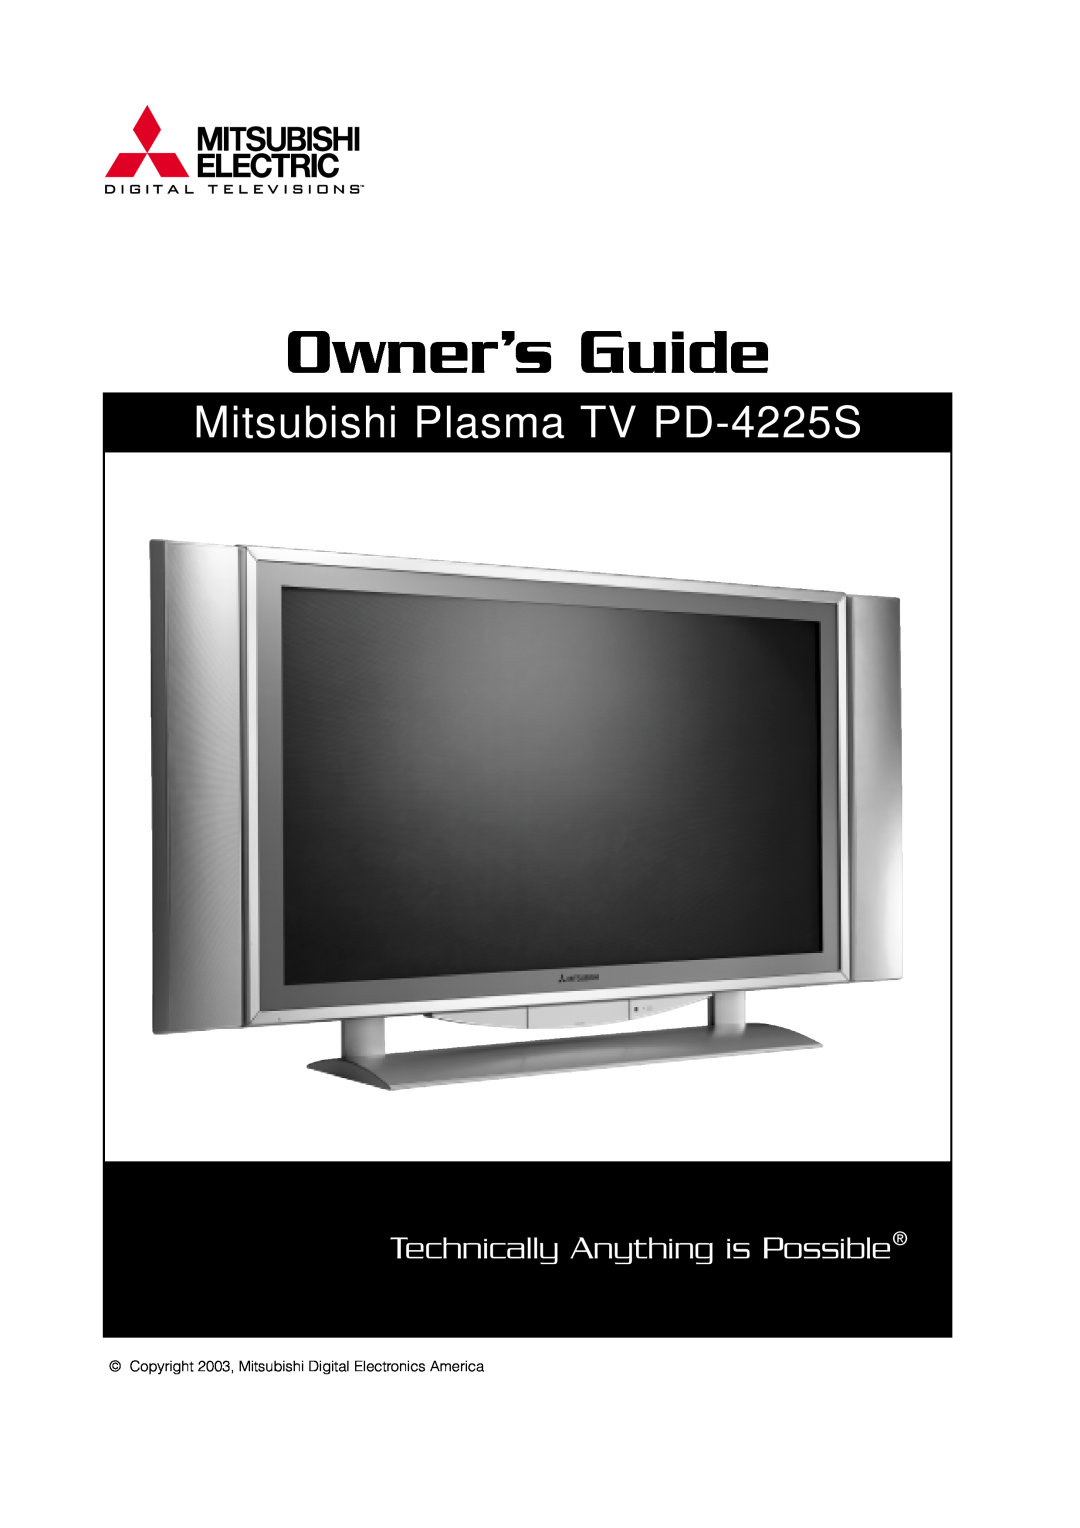 Mitsubishi Electronics manual Owner’s Guide, Mitsubishi Plasma TV PD-4225S, Technically Anything is Possible 